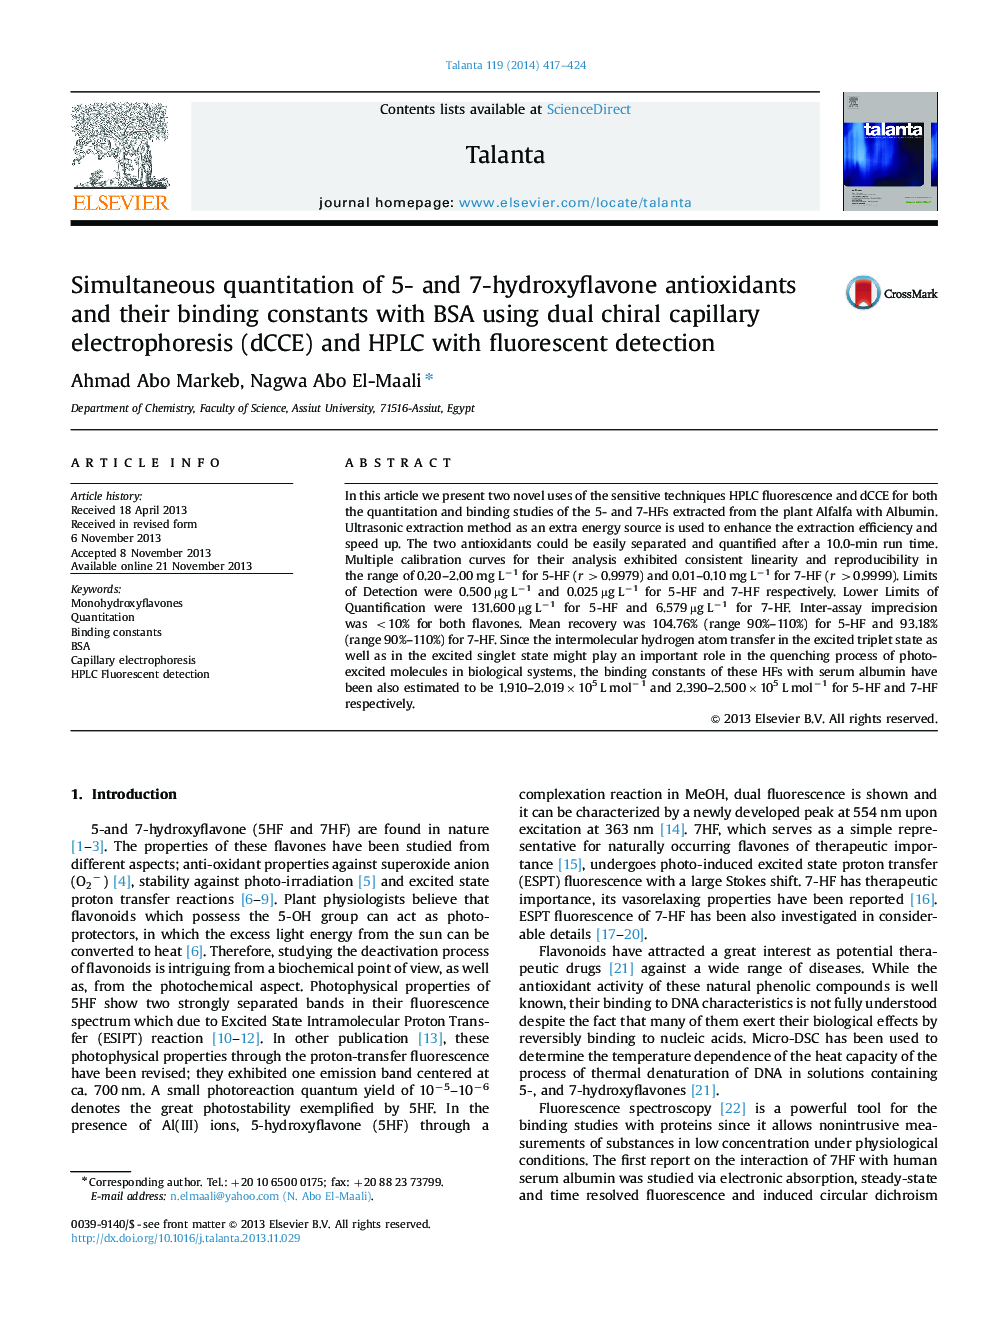 Simultaneous quantitation of 5- and 7-hydroxyflavone antioxidants and their binding constants with BSA using dual chiral capillary electrophoresis (dCCE) and HPLC with fluorescent detection